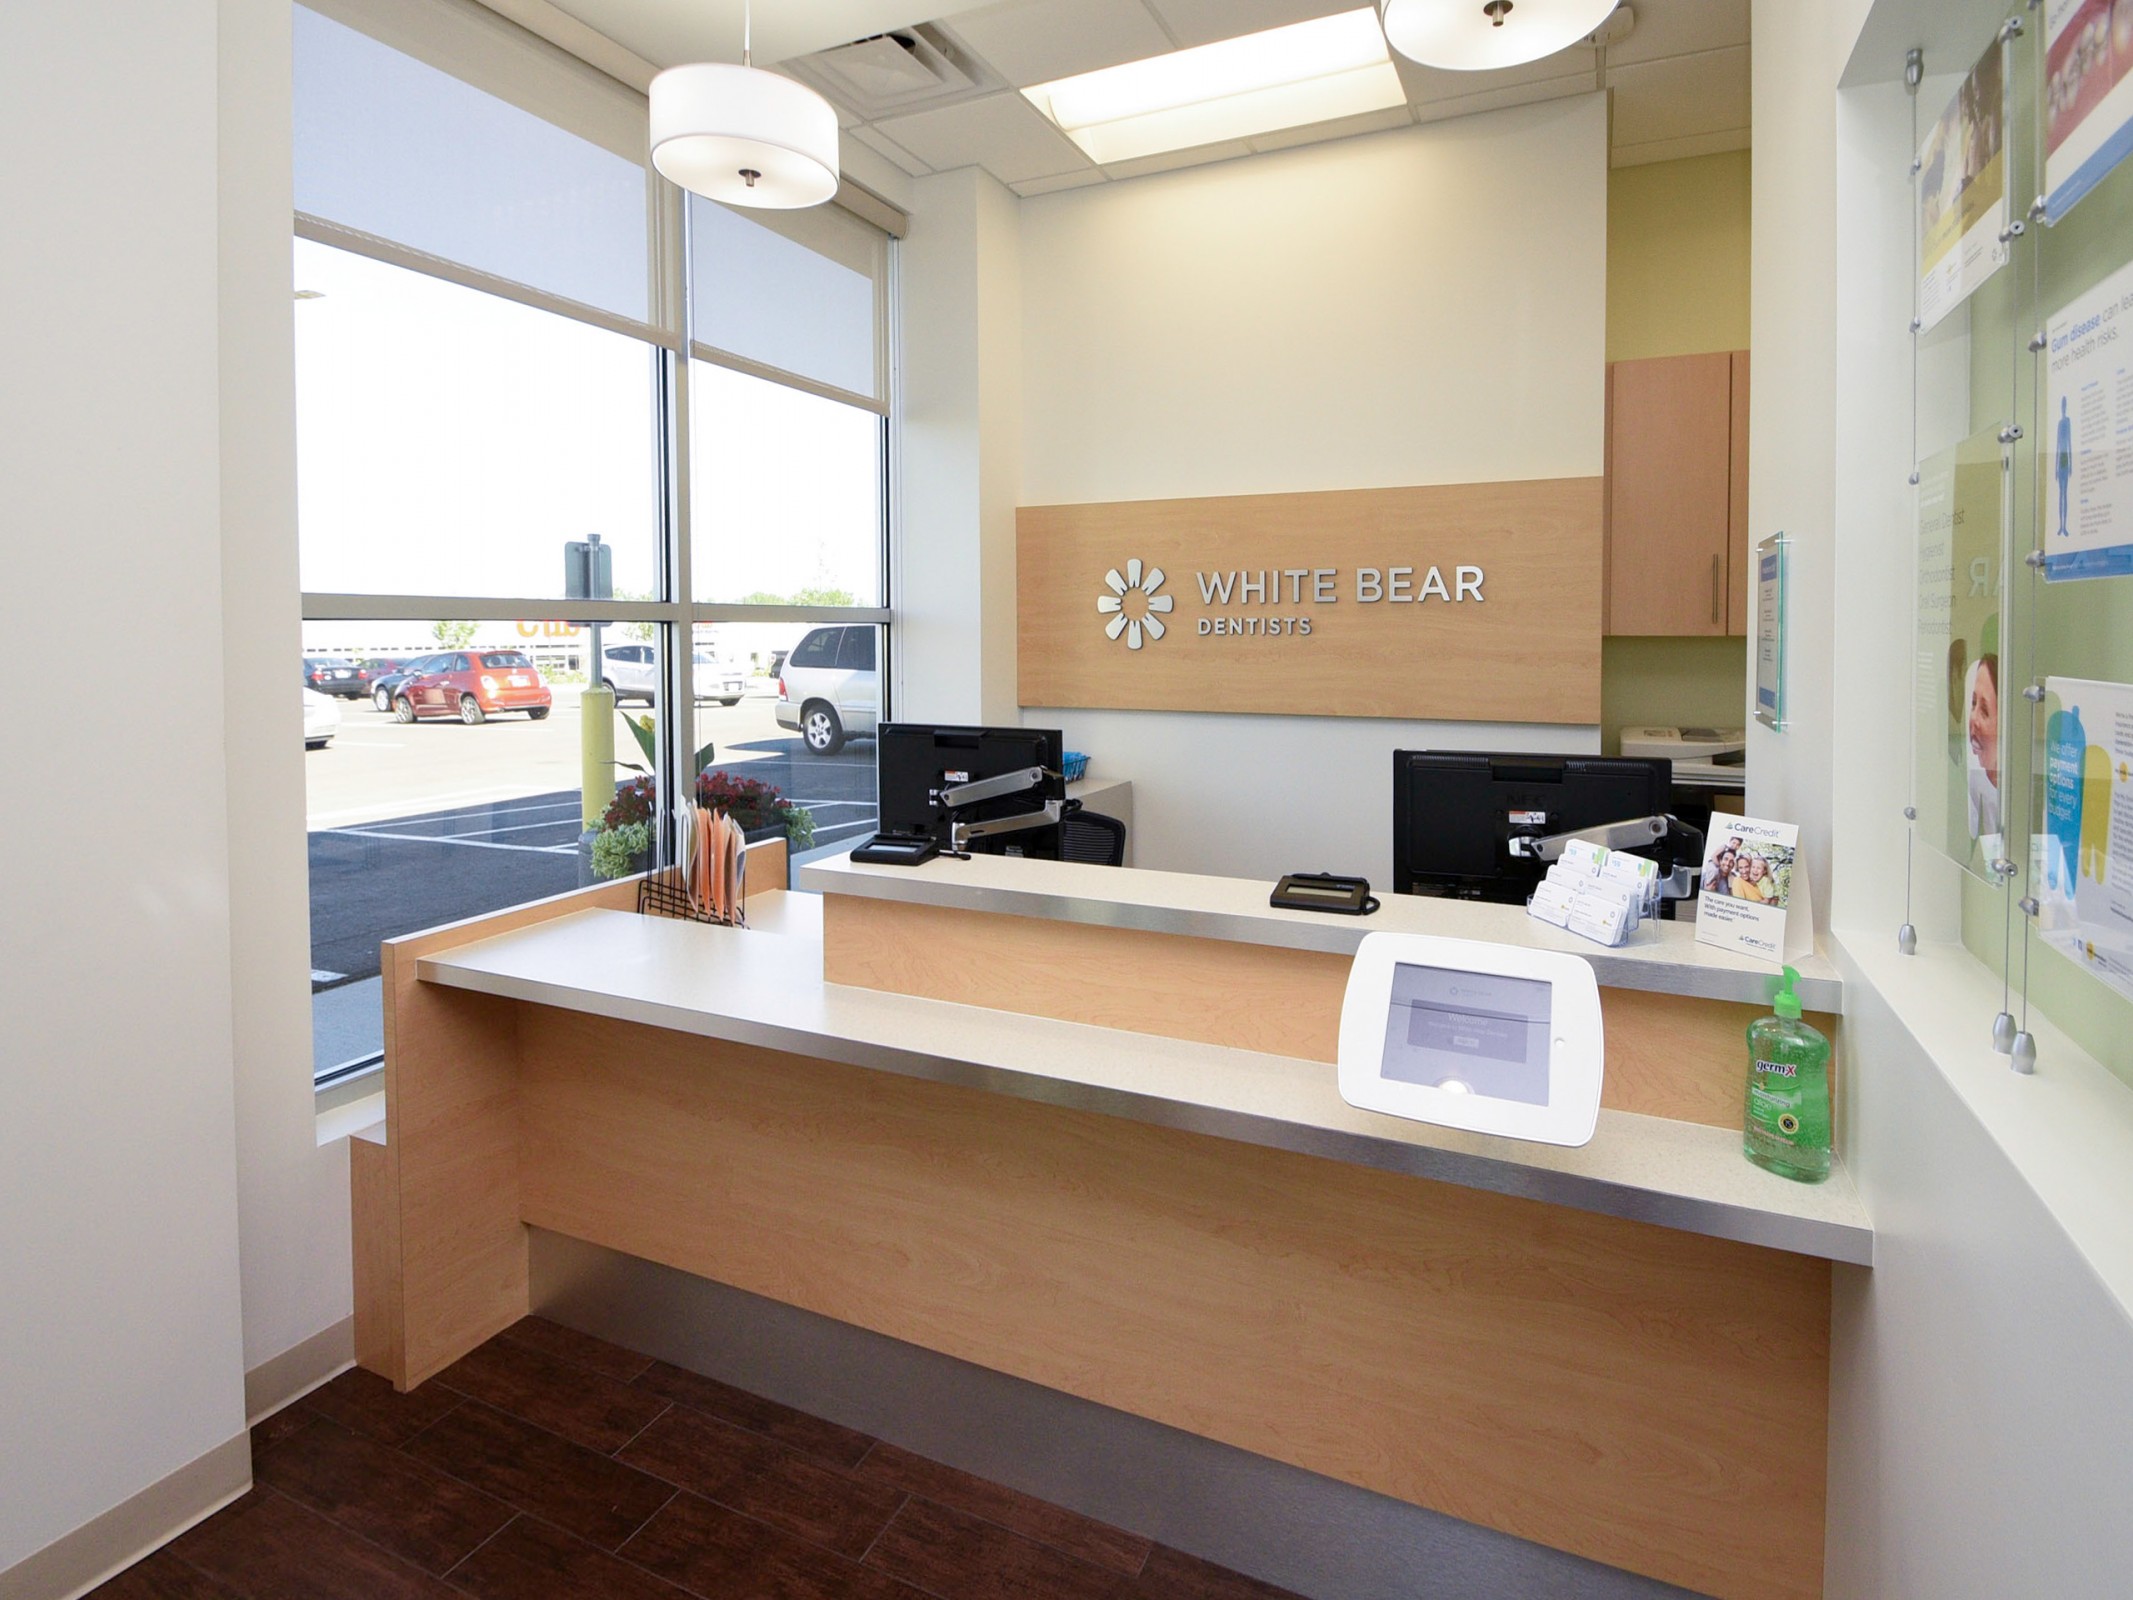 White Bear Dentists opened its doors to the White Bear Lake community in June 2016.